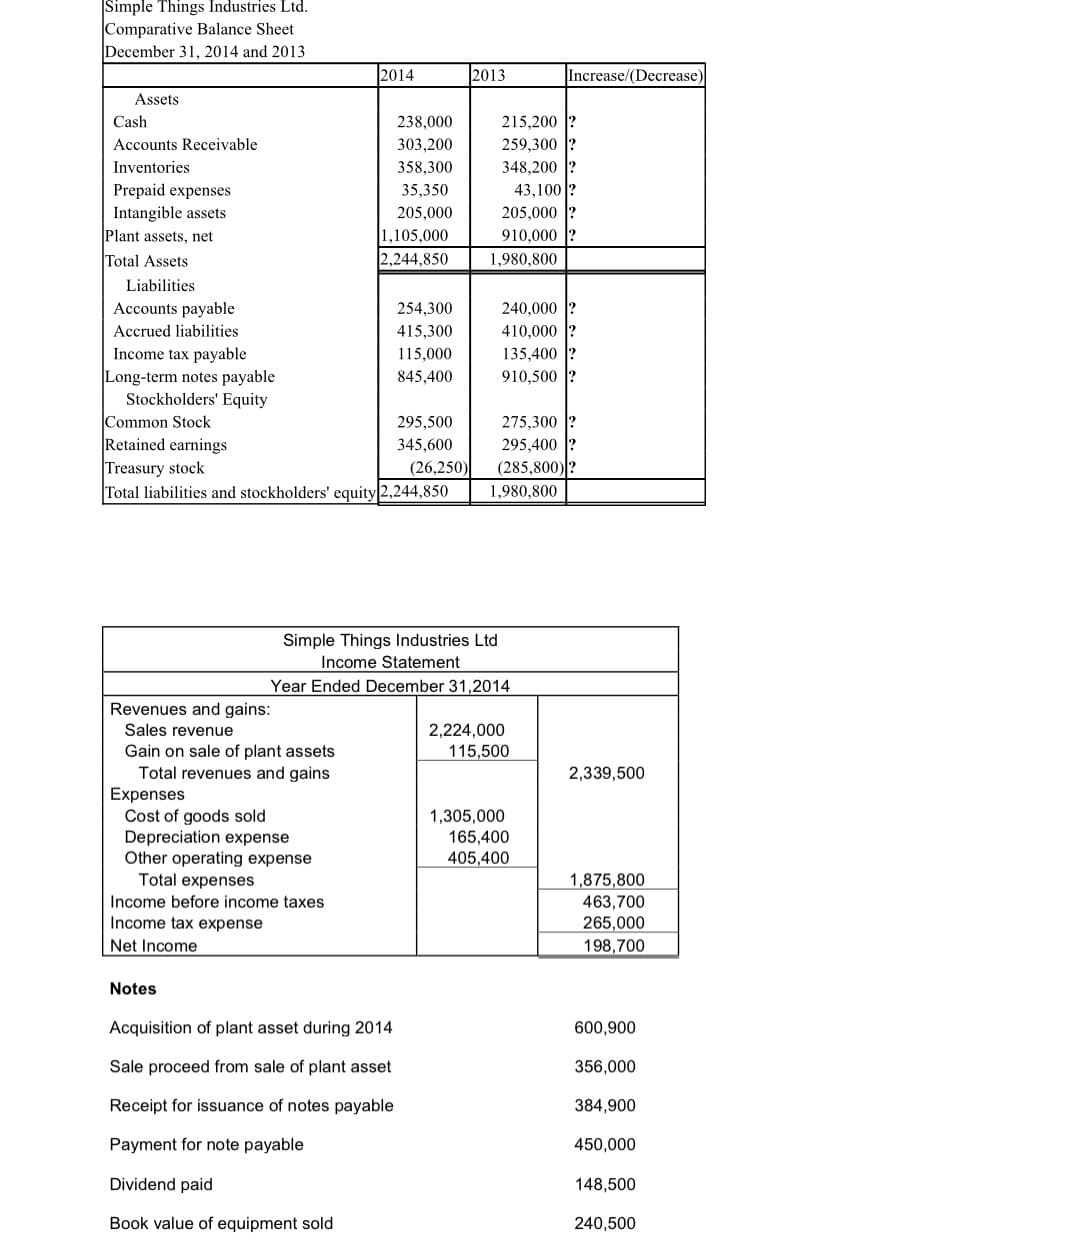 Simple Things Industries Ltd.
Comparative Balance Sheet
December 31, 2014 and 2013
2014
2013
Increase/(Decrease)
Assets
Cash
238,000
215,200
Accounts Receivable
303,200
259,300
Inventories
358,300
348,200
43,100 ?
205,000 ?
Prepaid expenses
Intangible assets
Plant assets, net
Total Assets
35,350
205,000
1,105,000
2,244,850
910,000
1,980,800
Liabilities
Accounts payable
254,300
240,000
Accrued liabilities
415,300
410,000 ?
Income tax payable
Long-term notes payable
Stockholders' Equity
115,000
135,400
845,400
910,500
Common Stock
Retained earnings
Treasury stock
Total liabilities and stockholders' equity 2,244,850
275,300 ?
295,400 ?
(285,800)?
295,500
345,600
(26,250)
1,980,800
Simple Things Industries Ltd
Income Statement
Year Ended December 31,2014
Revenues and gains:
2,224,000
115,500
Sales revenue
Gain on sale of plant assets
Total revenues and gains
2,339,500
Expenses
Cost of goods sold
Depreciation expense
Other operating expense
Total expenses
1,305,000
165,400
405,400
1,875,800
463,700
265,000
Income before income taxes
Income tax expense
Net Income
198,700
Notes
Acquisition of plant asset during 2014
600,900
Sale proceed from sale of plant asset
356,000
Receipt for issuance of notes payable
384,900
Payment for note payable
450,000
Dividend paid
148,500
Book value of equipment sold
240,500
